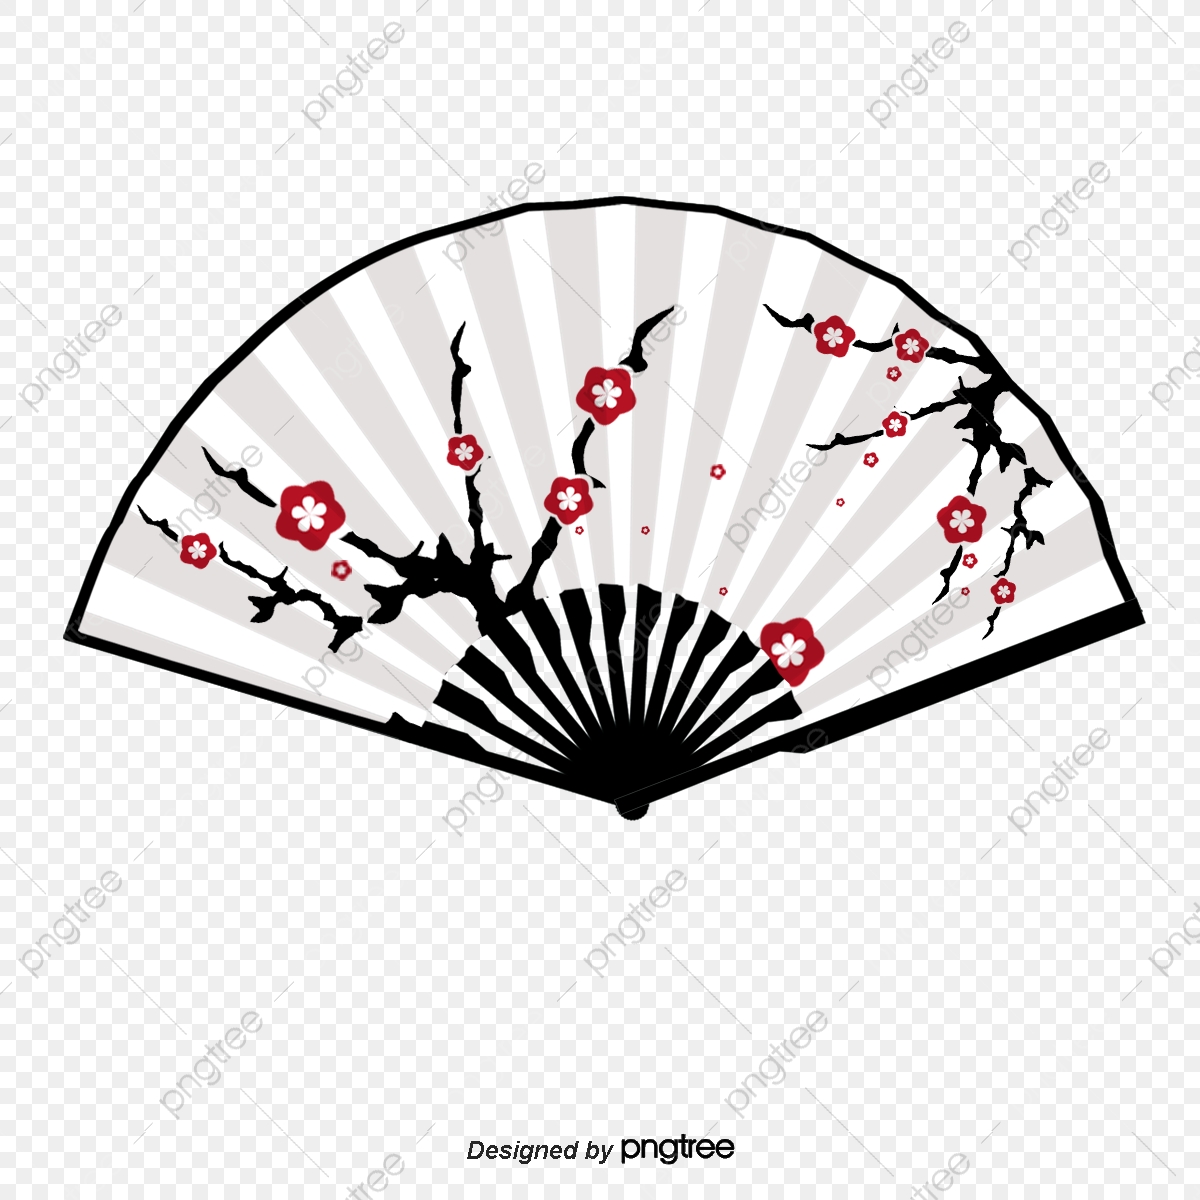 Cherry blossom fresh and. Fan clipart japanese style